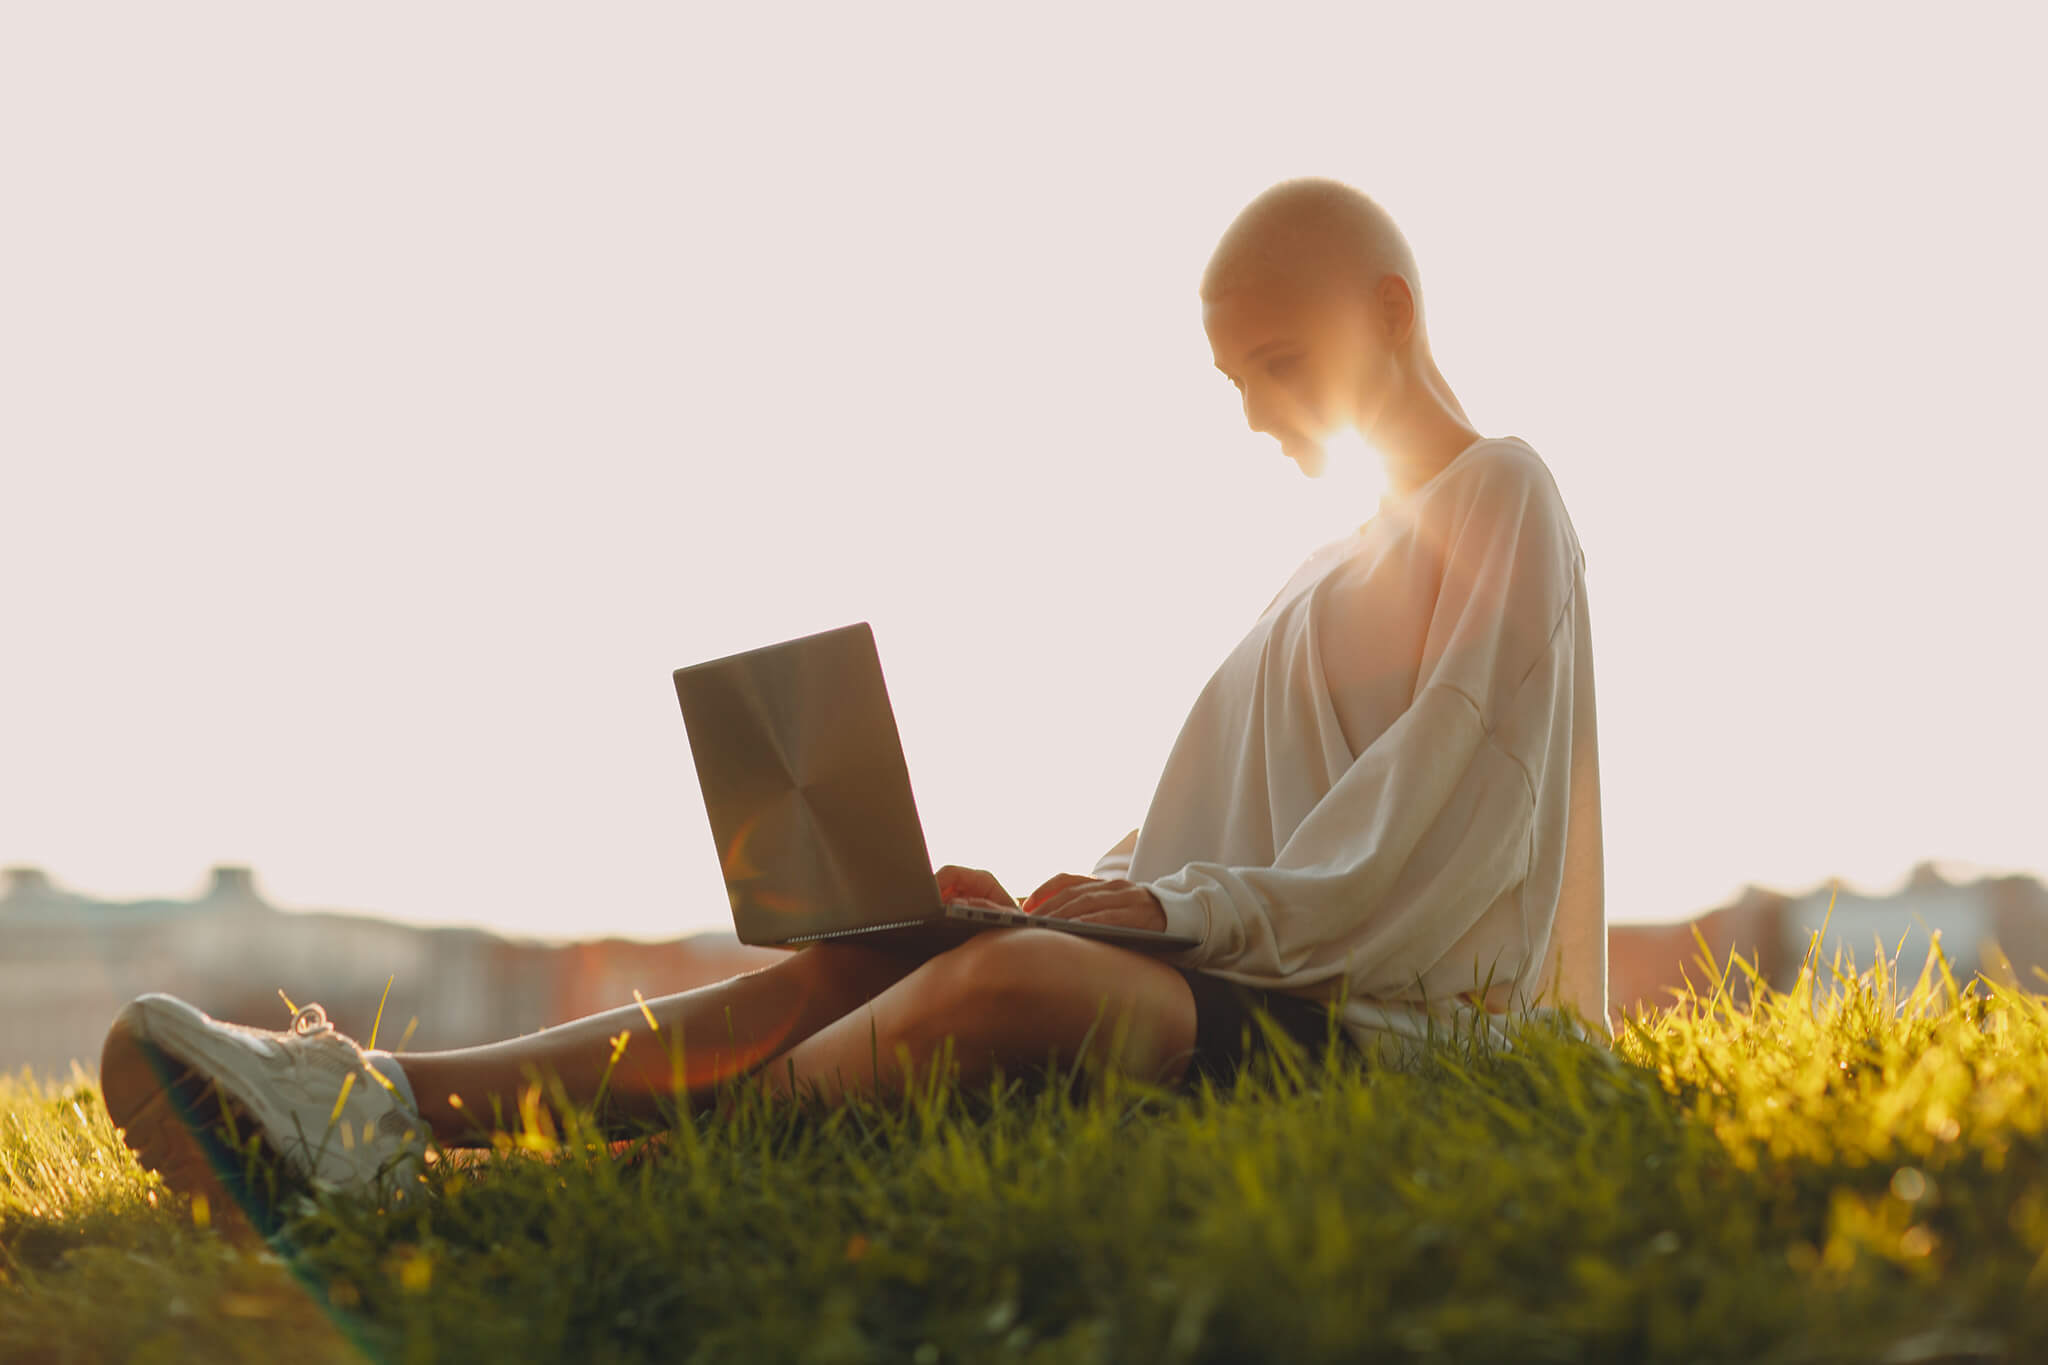 Person in white robe sitting on green grass field using silver macbook. The sun is behind their head with rays visible under their chin.